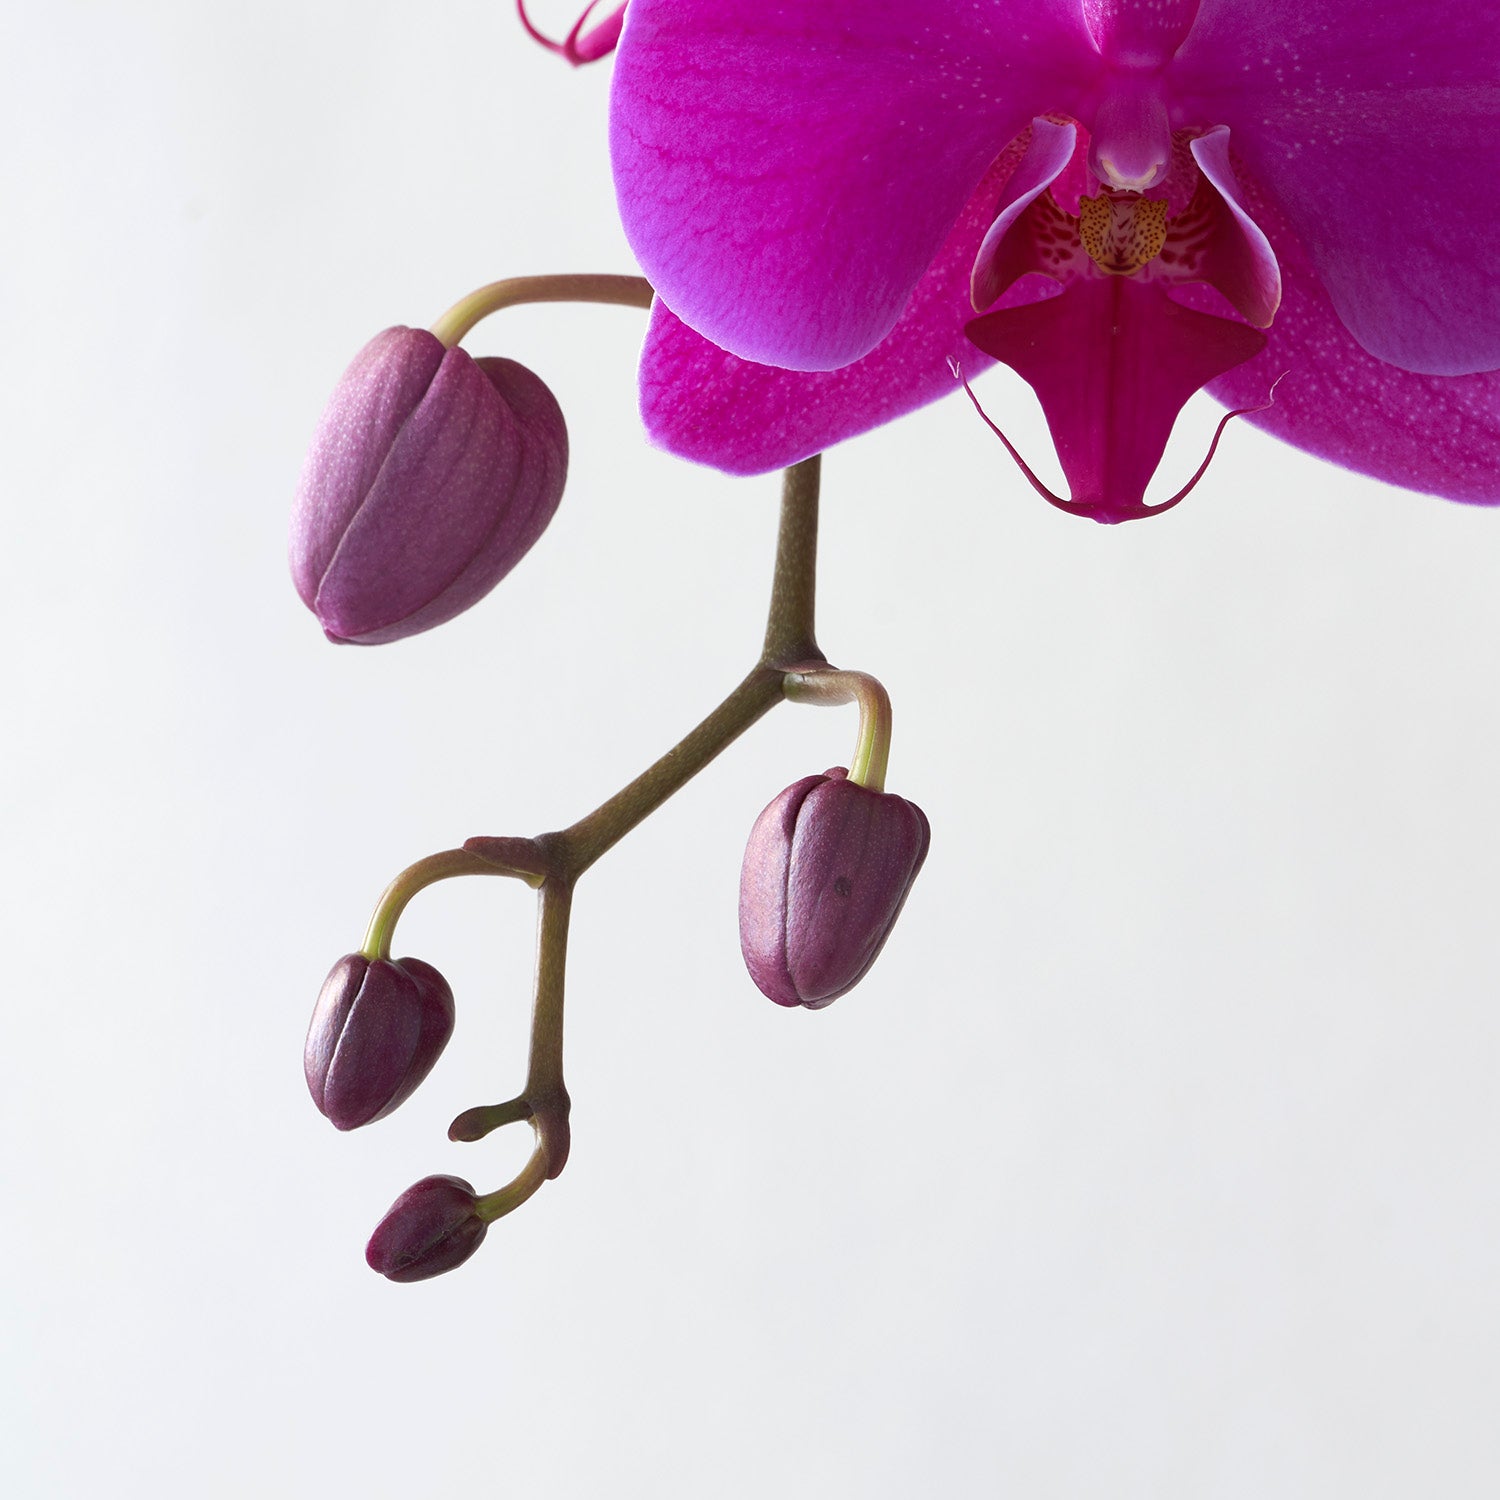 Closeup of fuchsia pink phalaenopsis orchid buds and flower on white background.